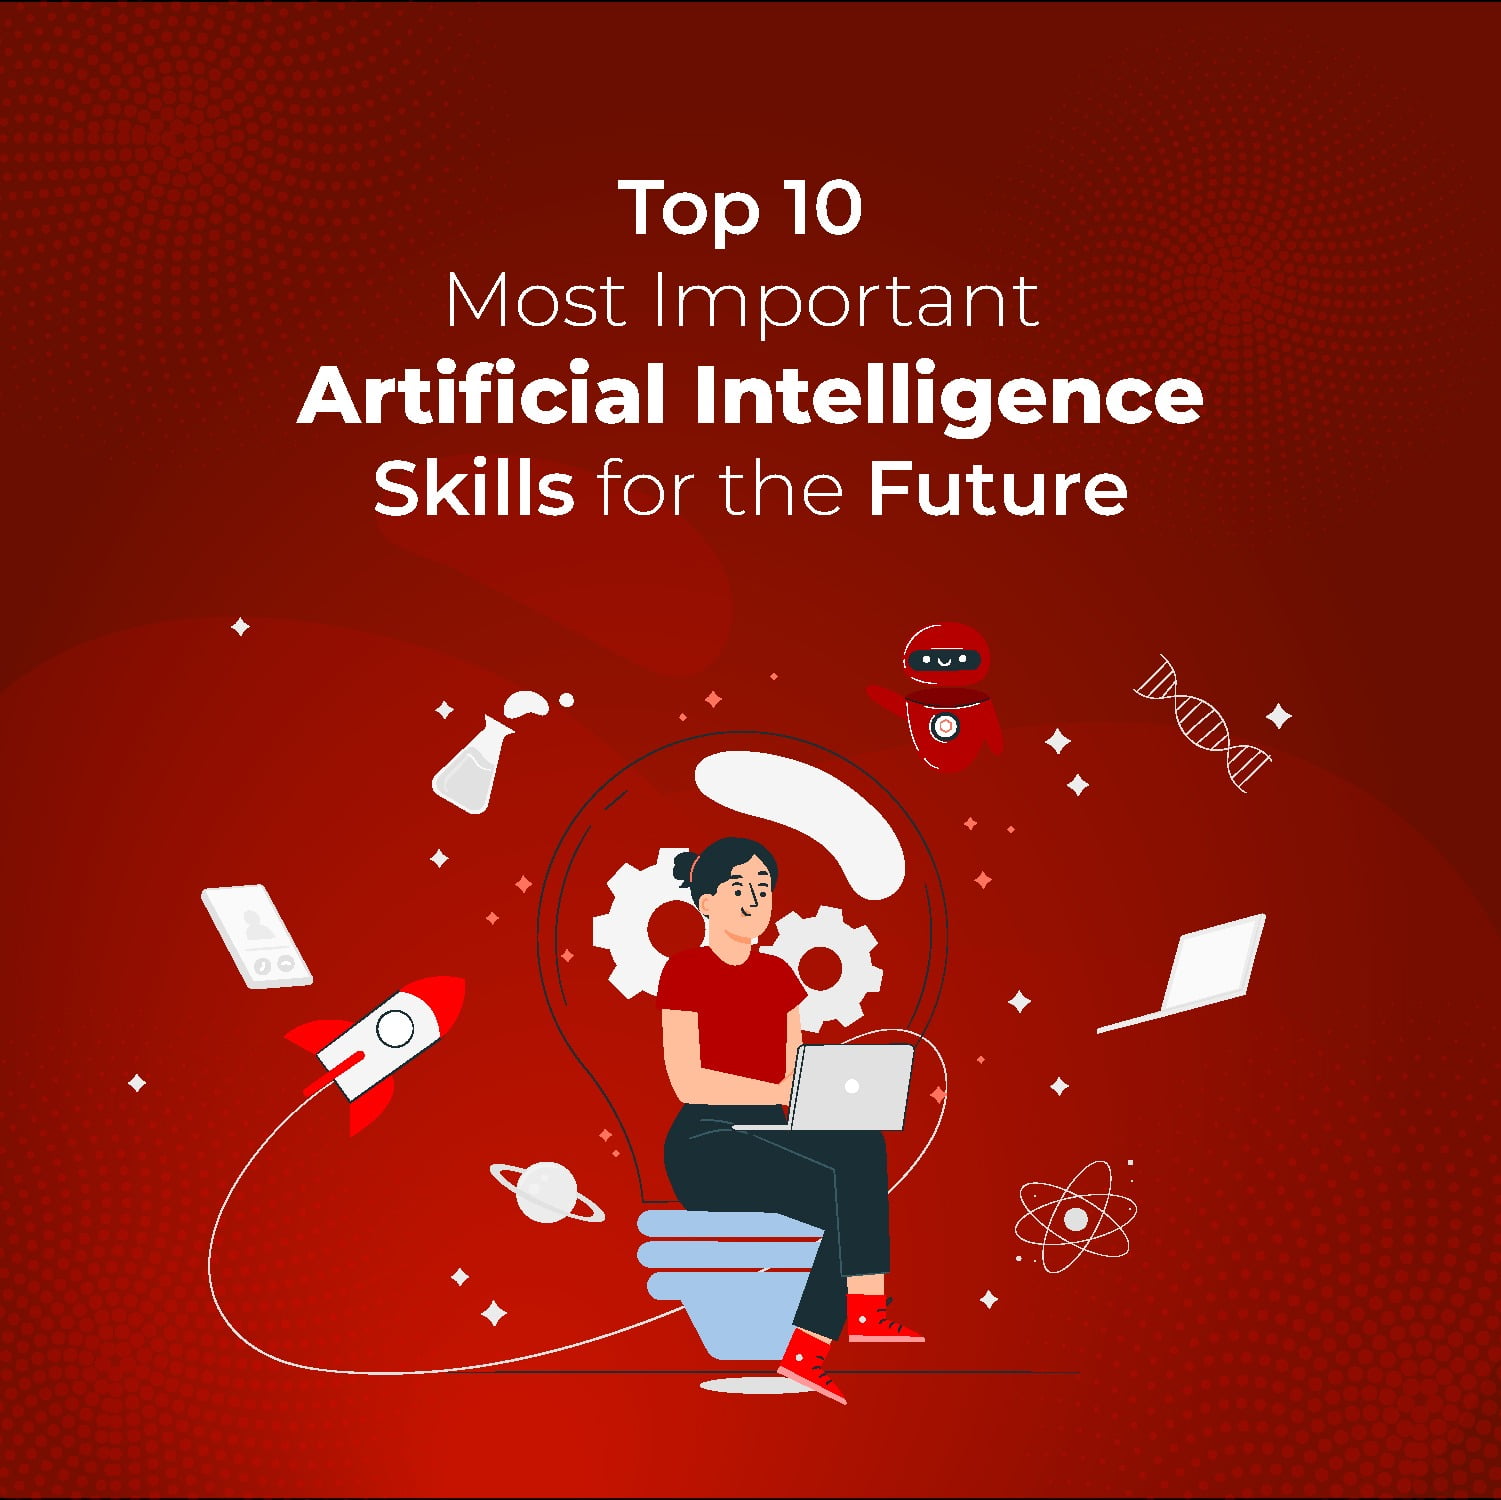 Top 10 Most Important Artificial Intelligence Skills for the Future